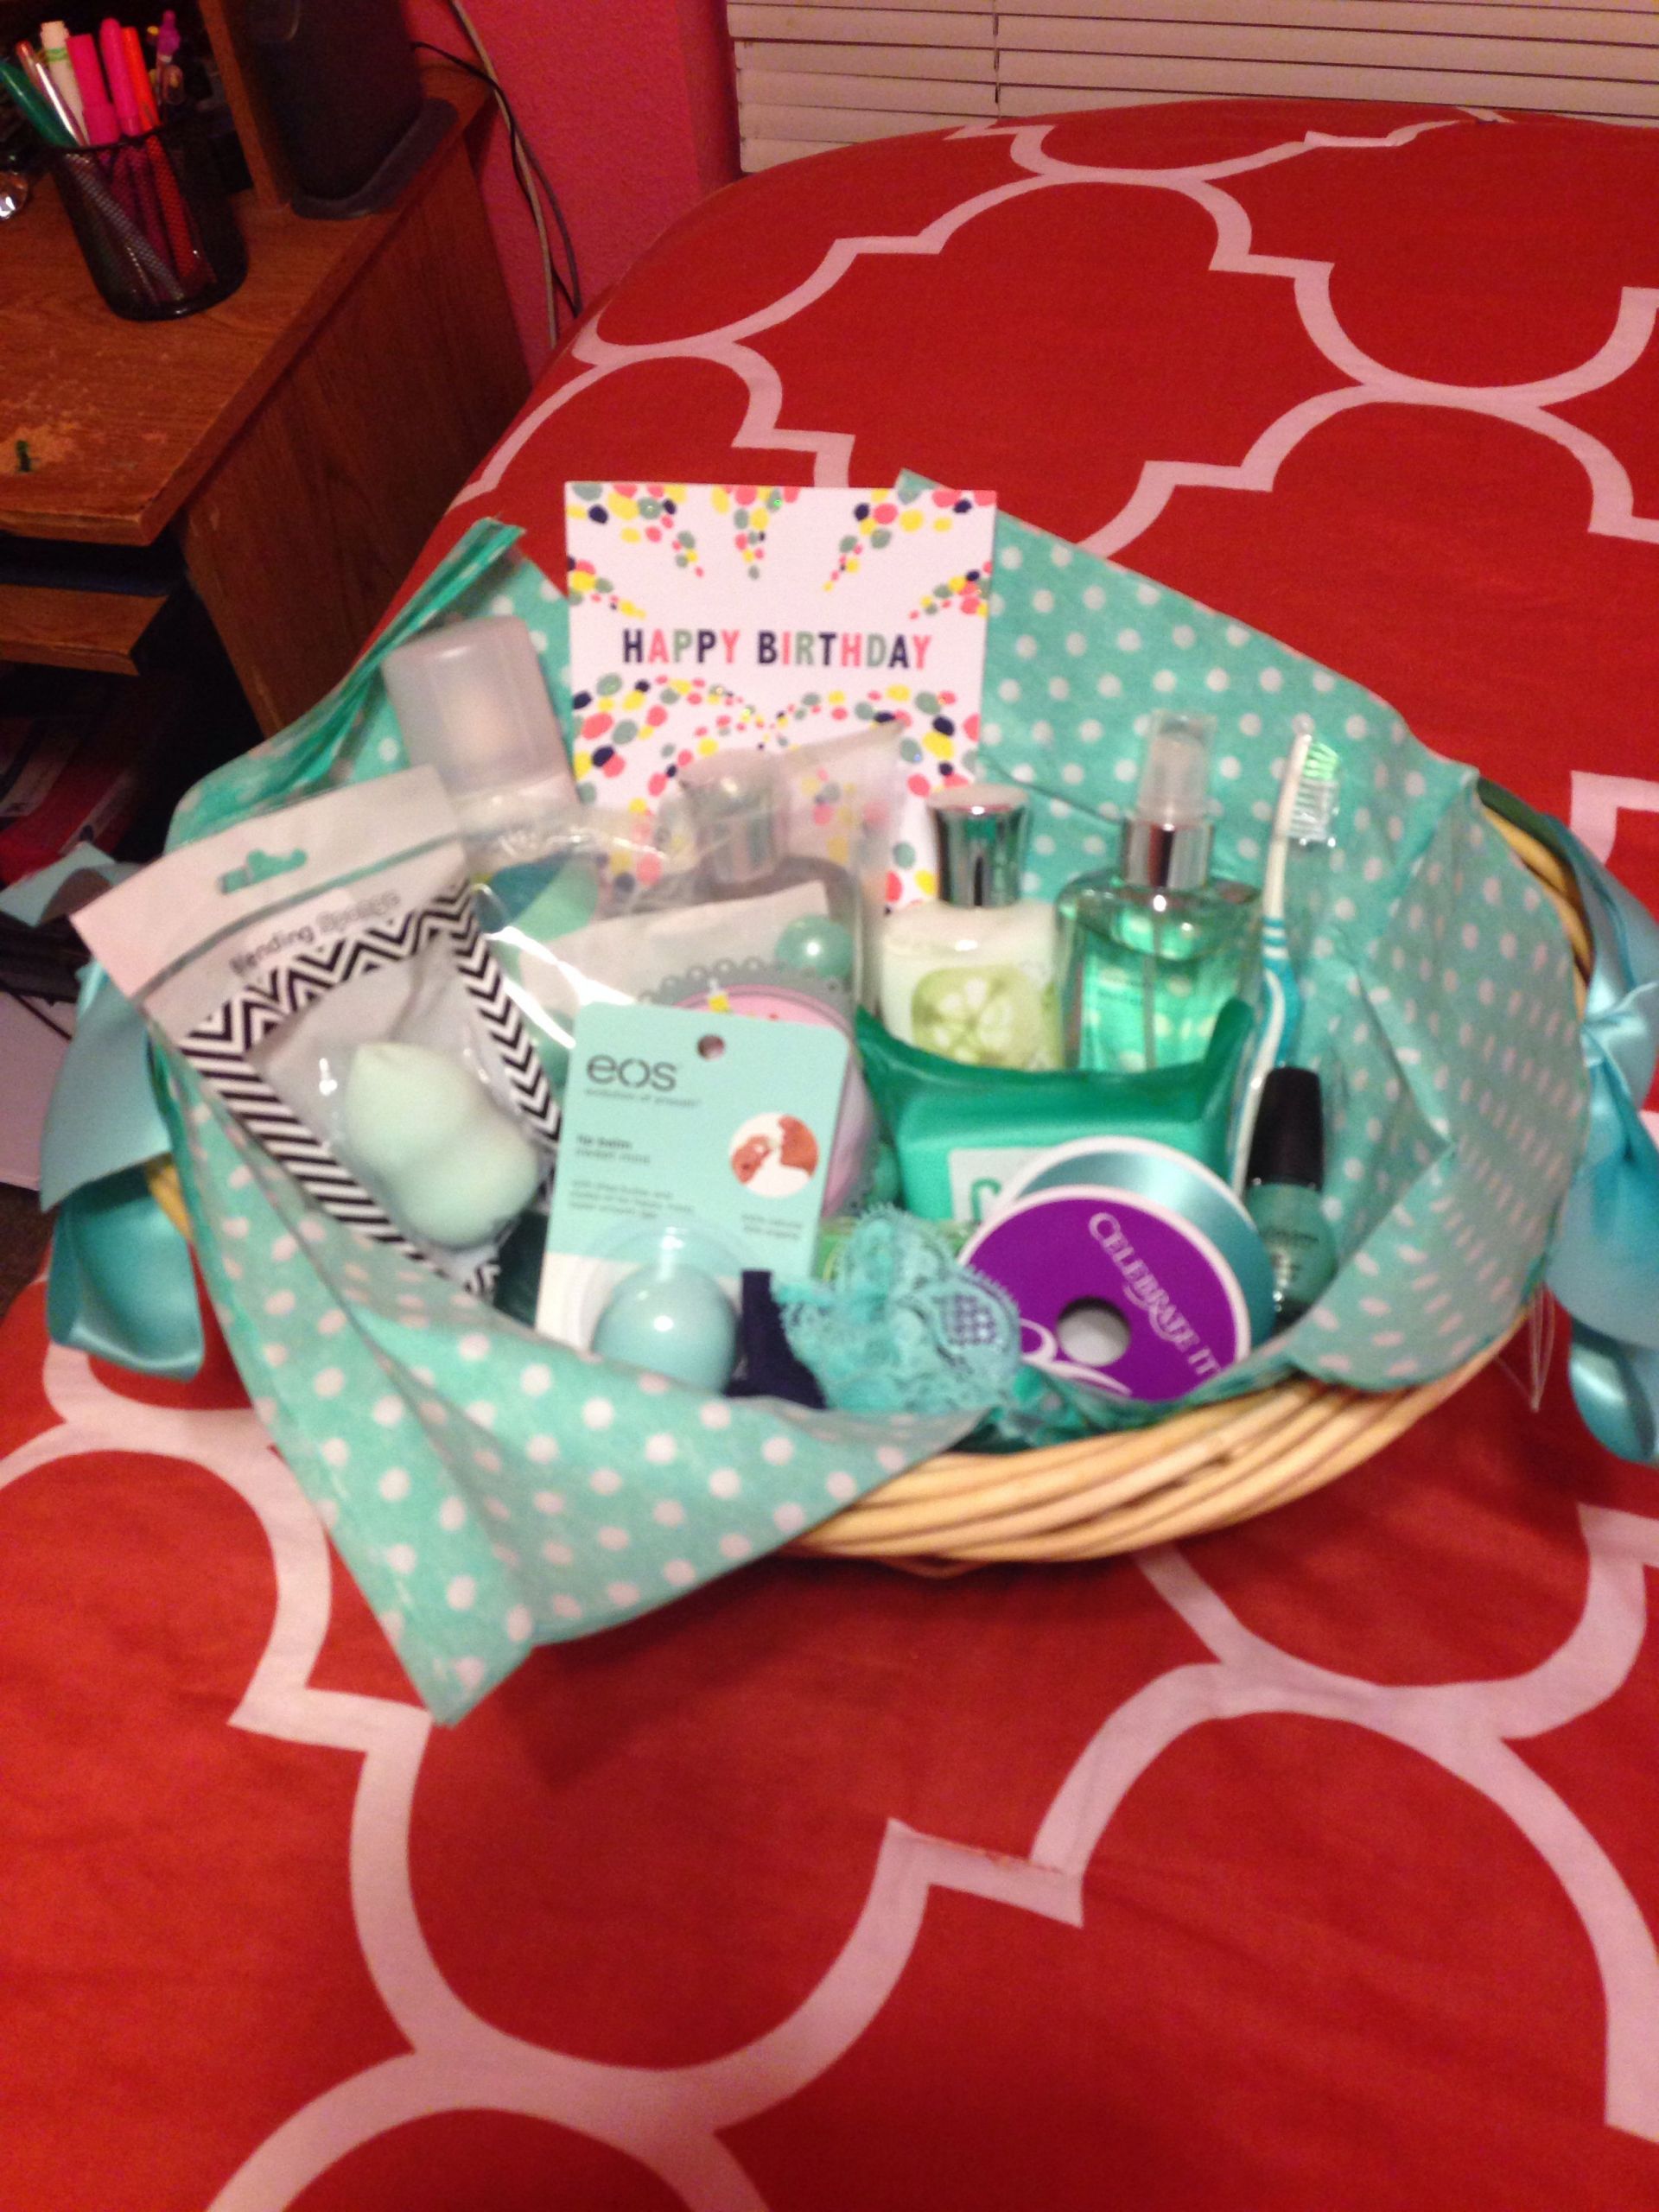 22 Ideas for Best Friend Birthday Gift Basket Ideas Home, Family